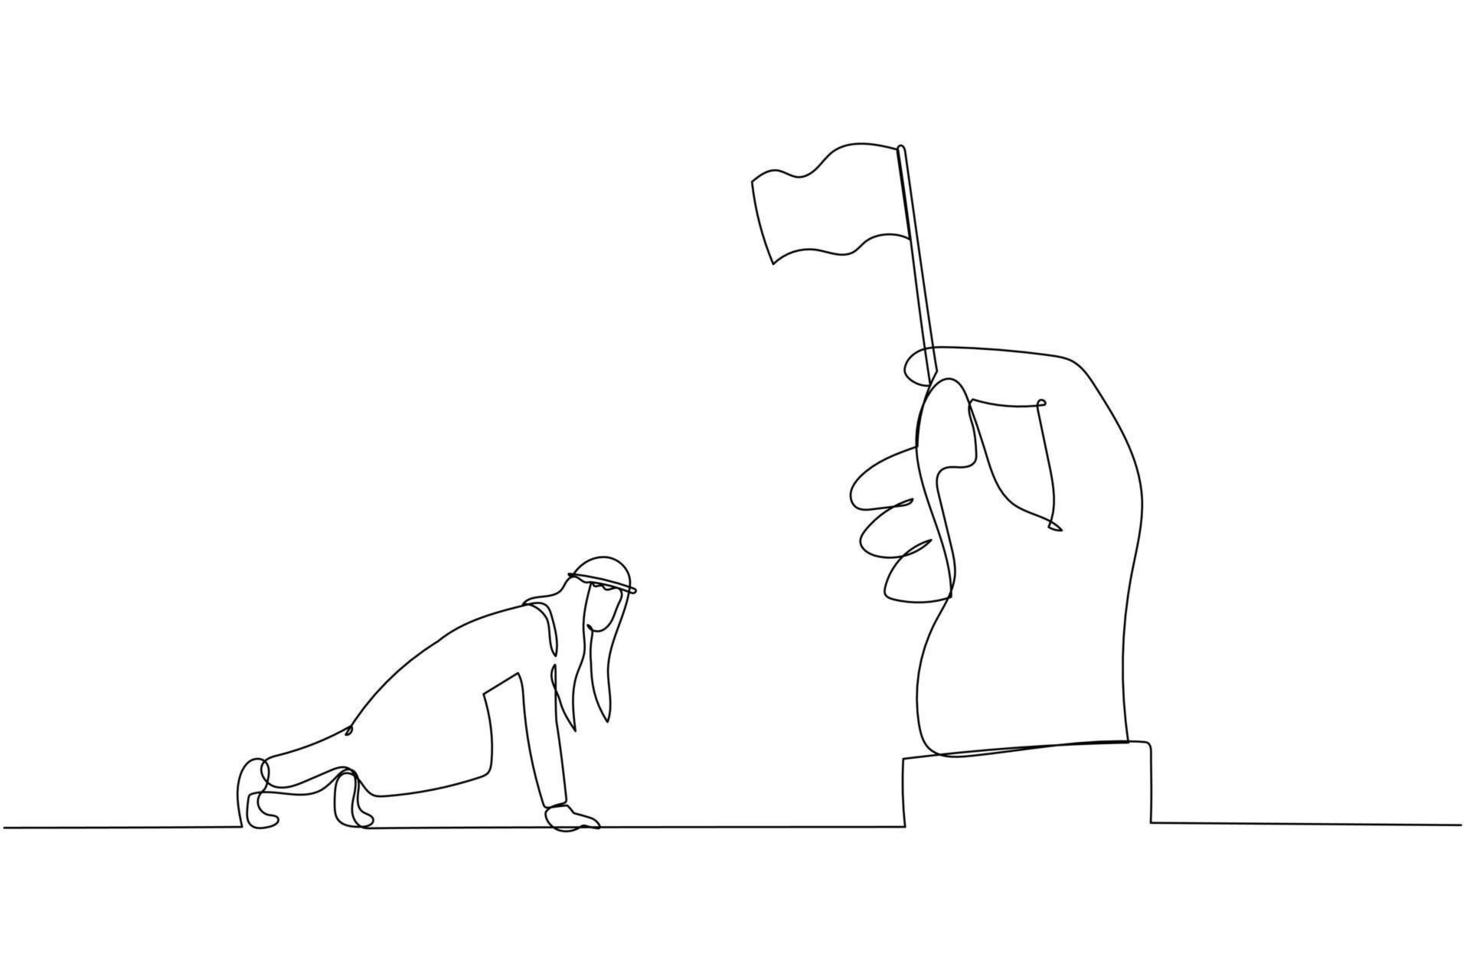 Illustration of arab man ready to race on position waiting for flag. Single continuous line art vector